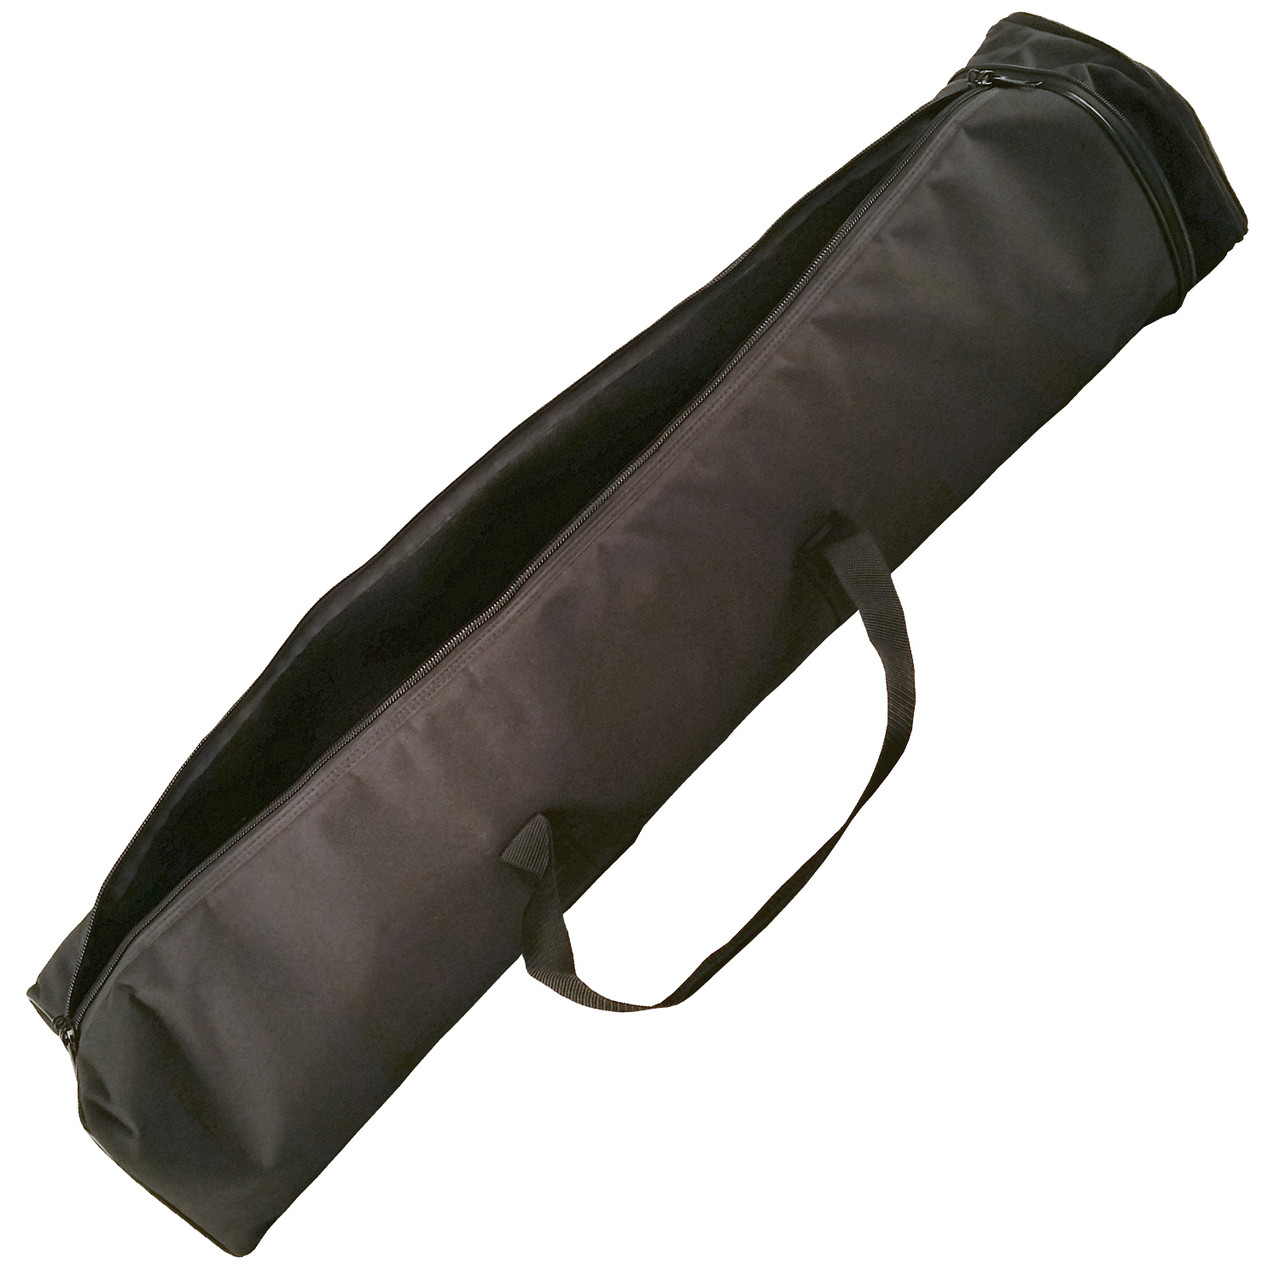 Small Pool Cue Bags  Shop for Cue Bags for Air & Car Travel - FCI Billiards